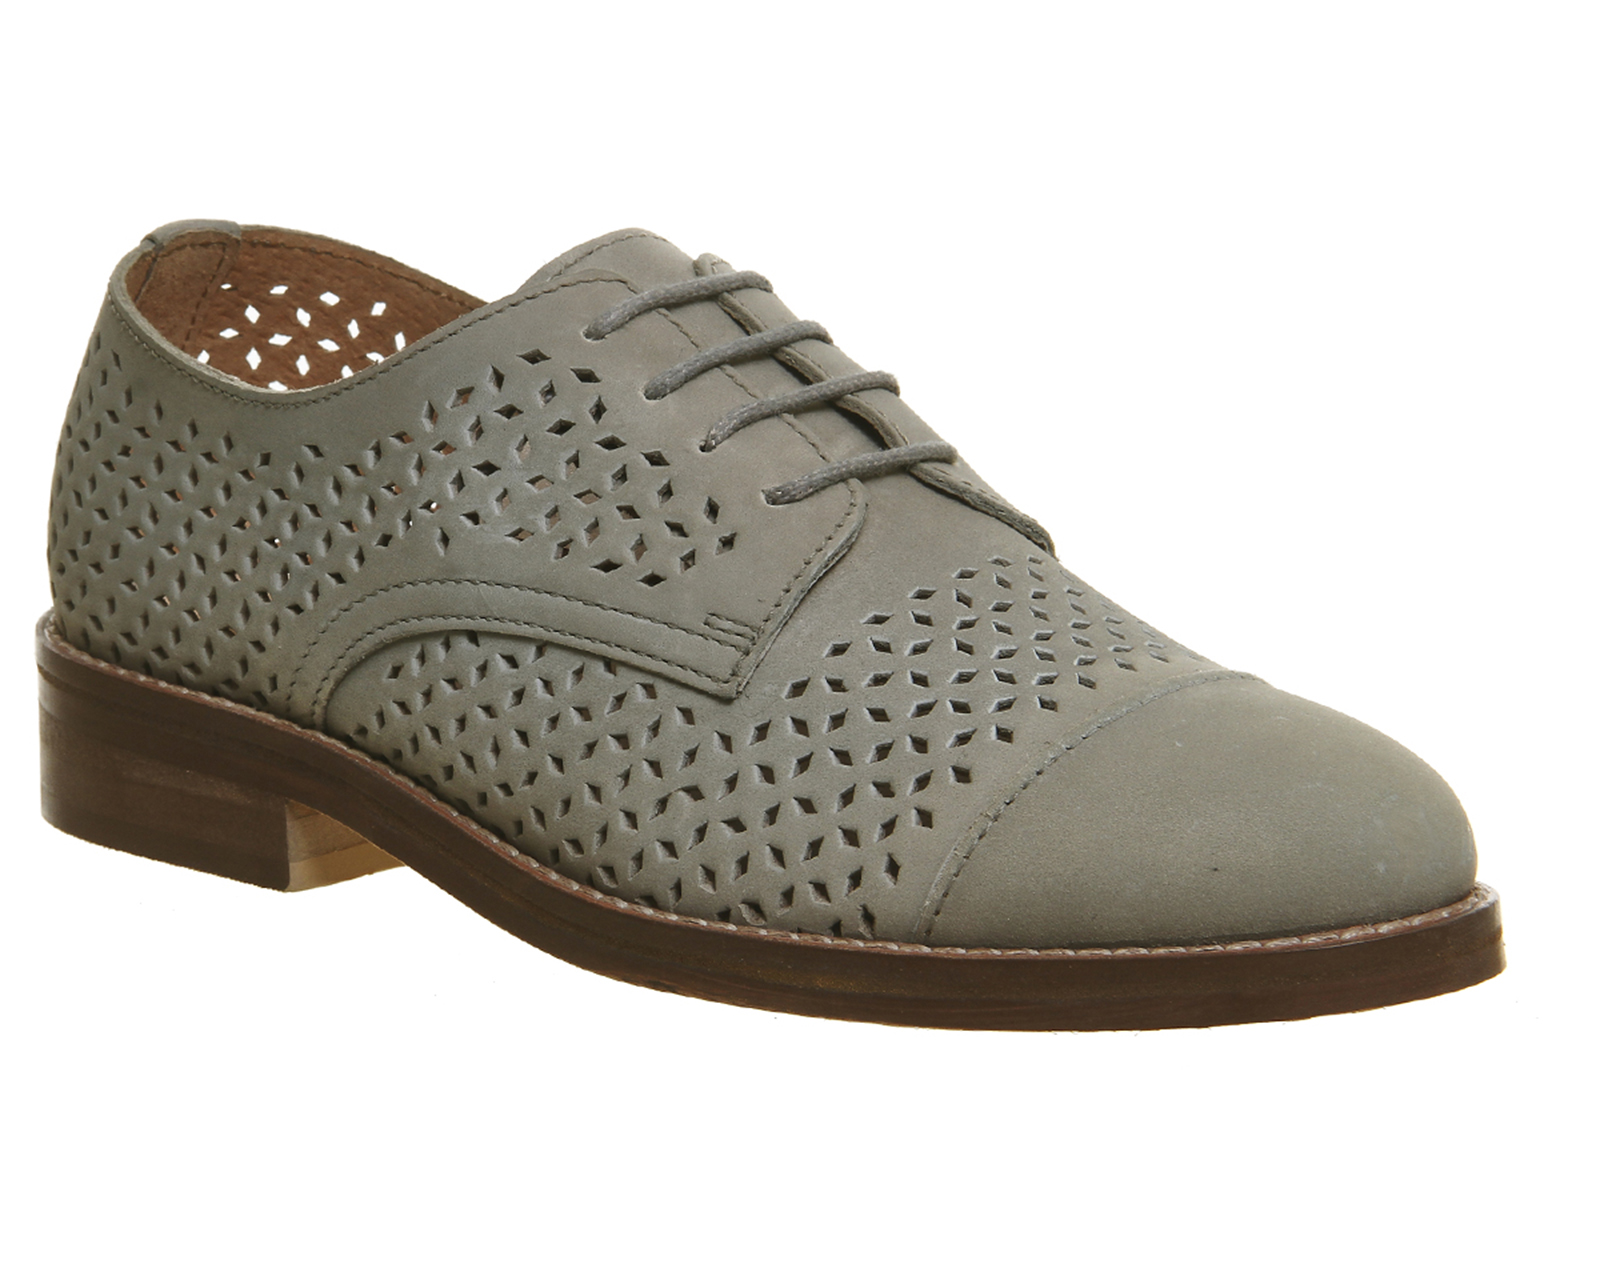 OFFICEDitto Perforated Lace UpsGrey Nubuck